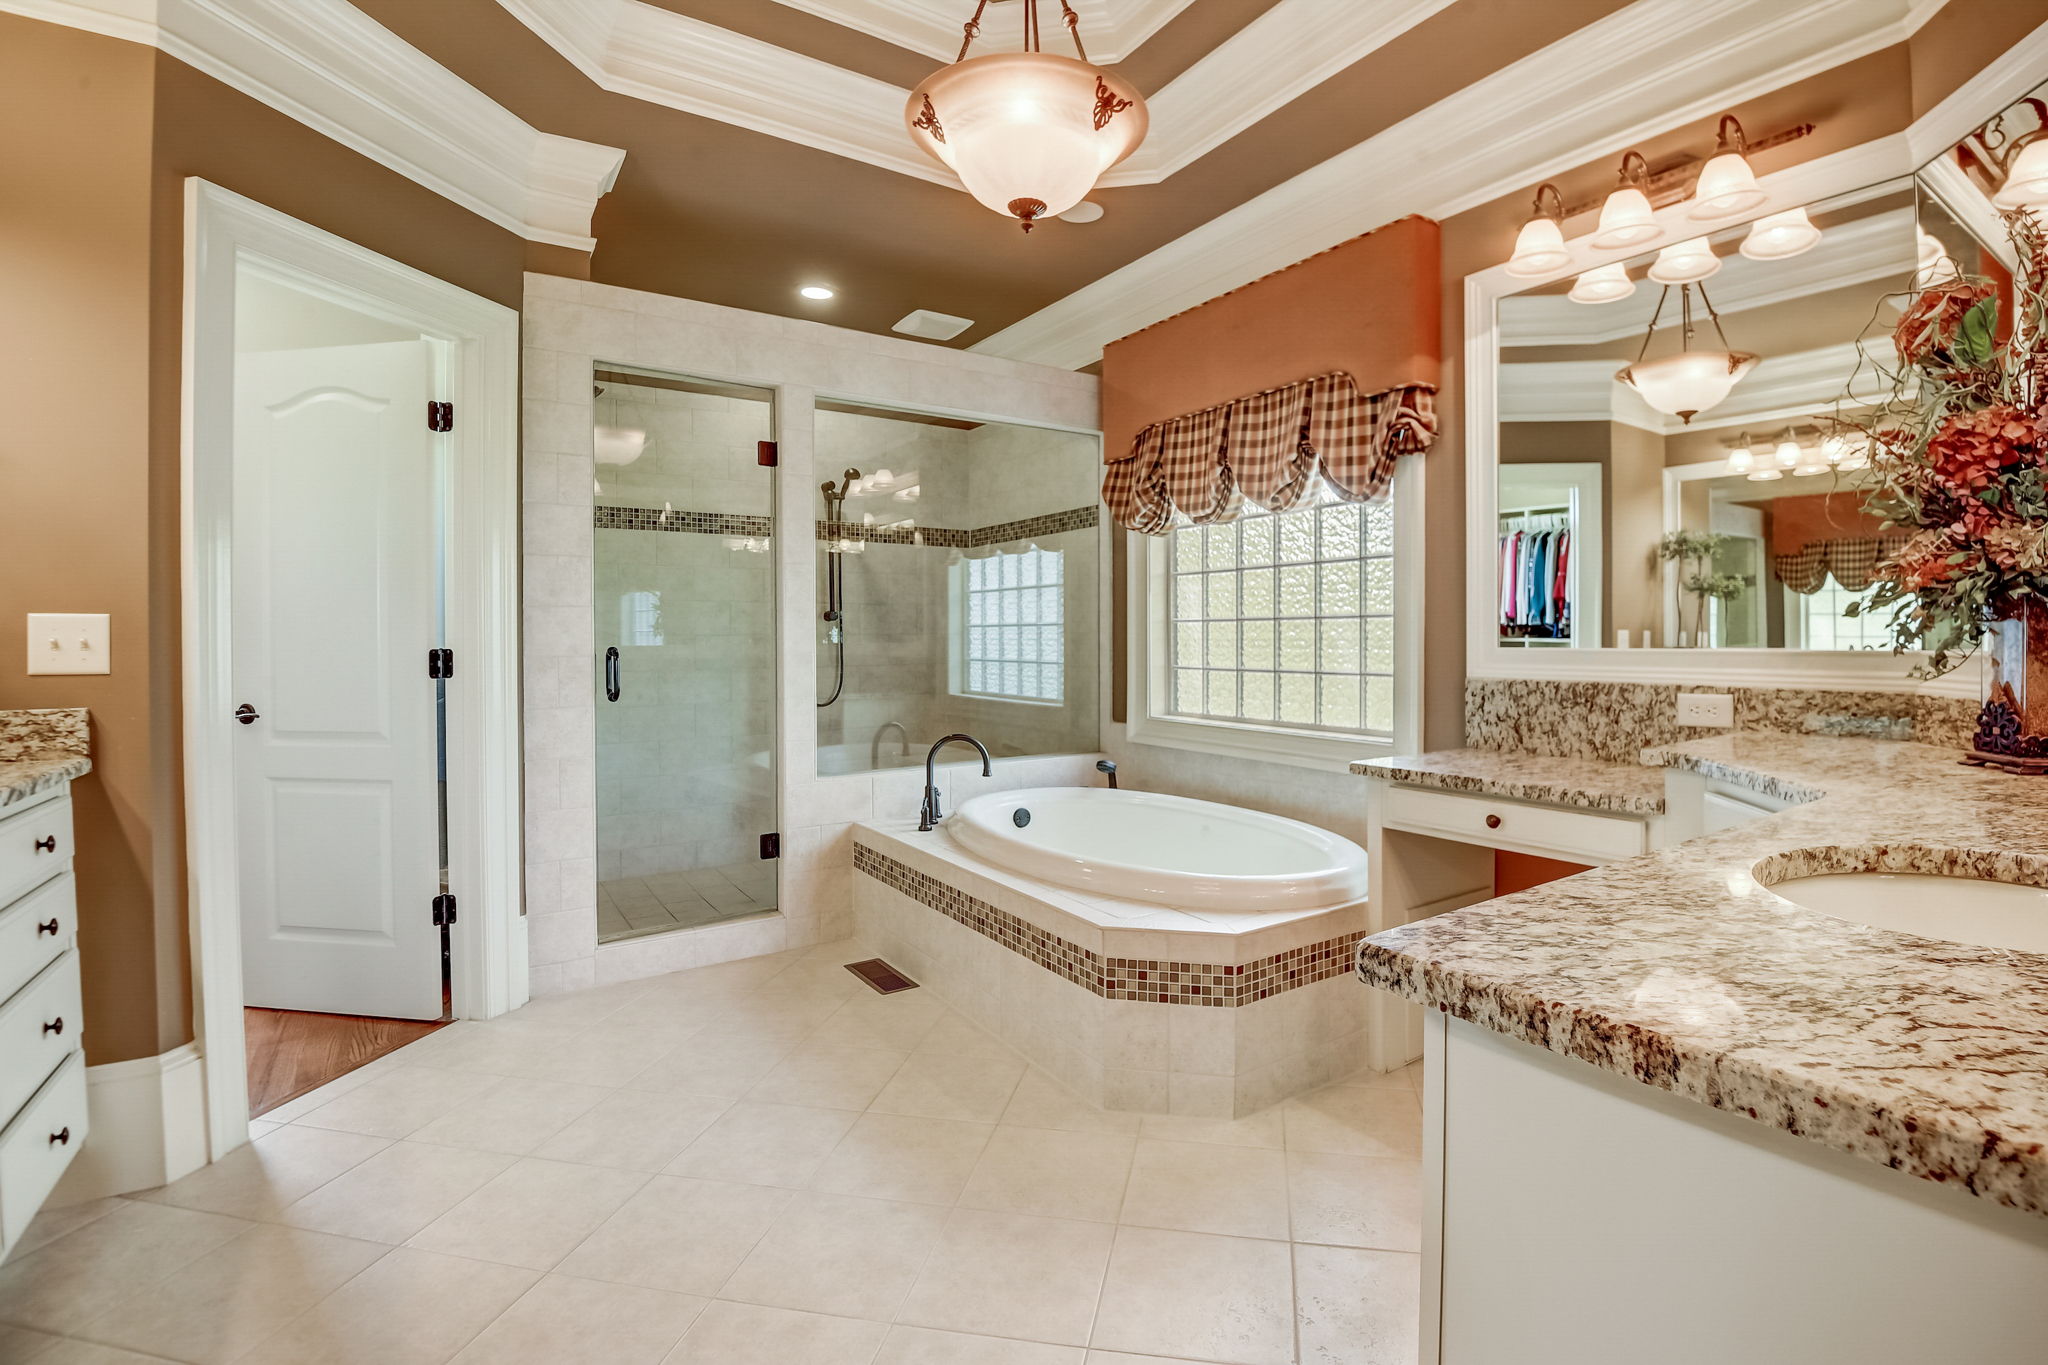 Primary Bathroom with Heated Tile Floors and His and Hers Closets with Built-in's!